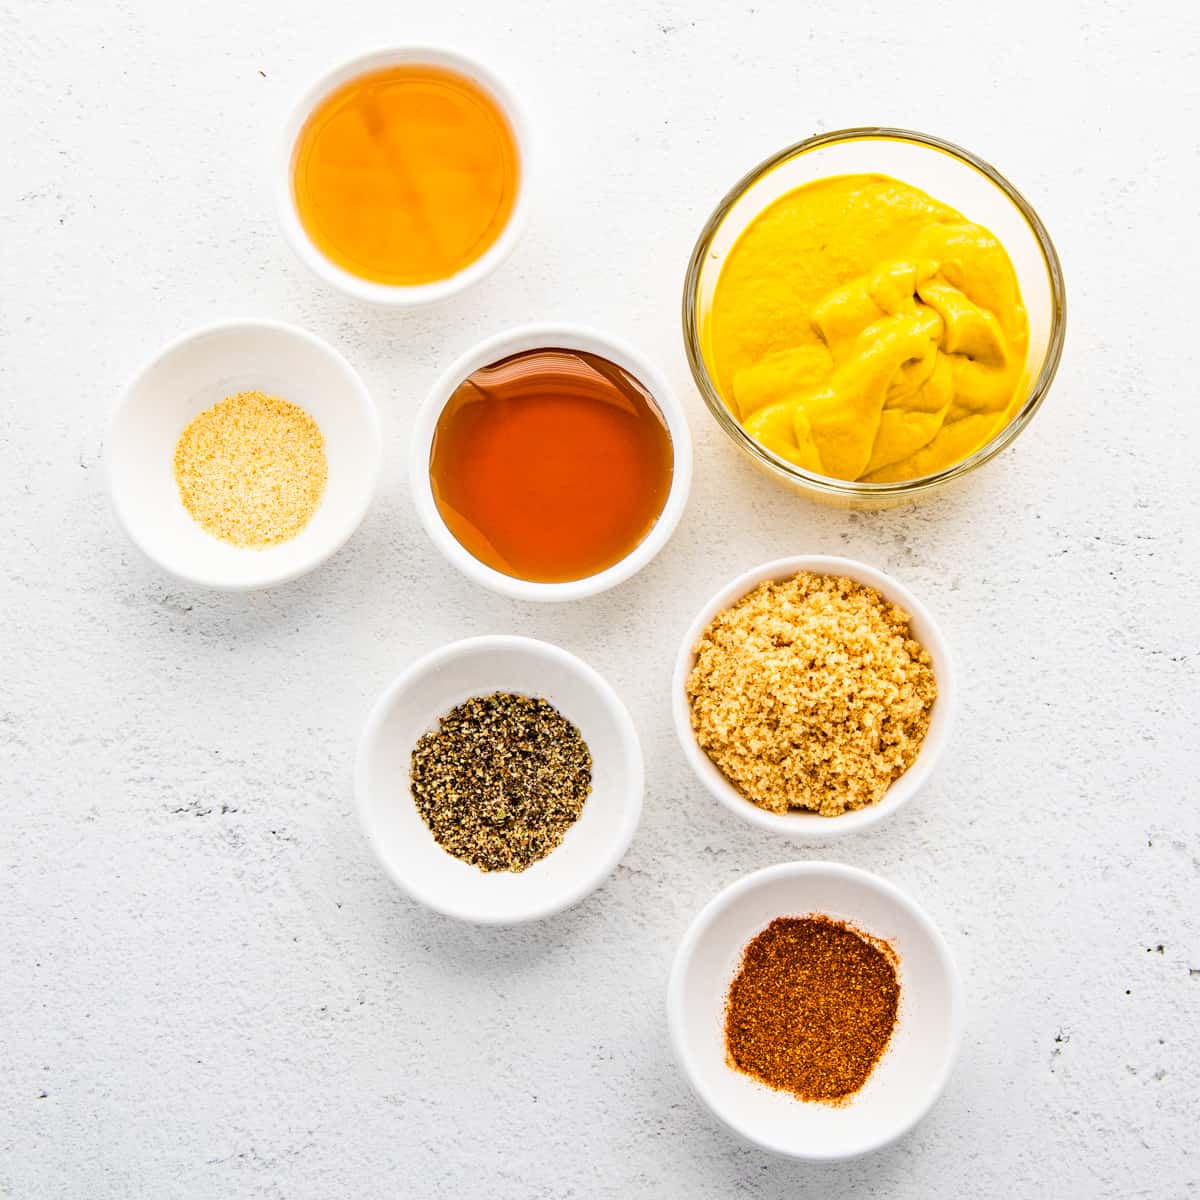 Small bowls of yellow mustard, cider vinegar, honey, garlic powder, black pepper, and cayenne pepper shown set on a counter.